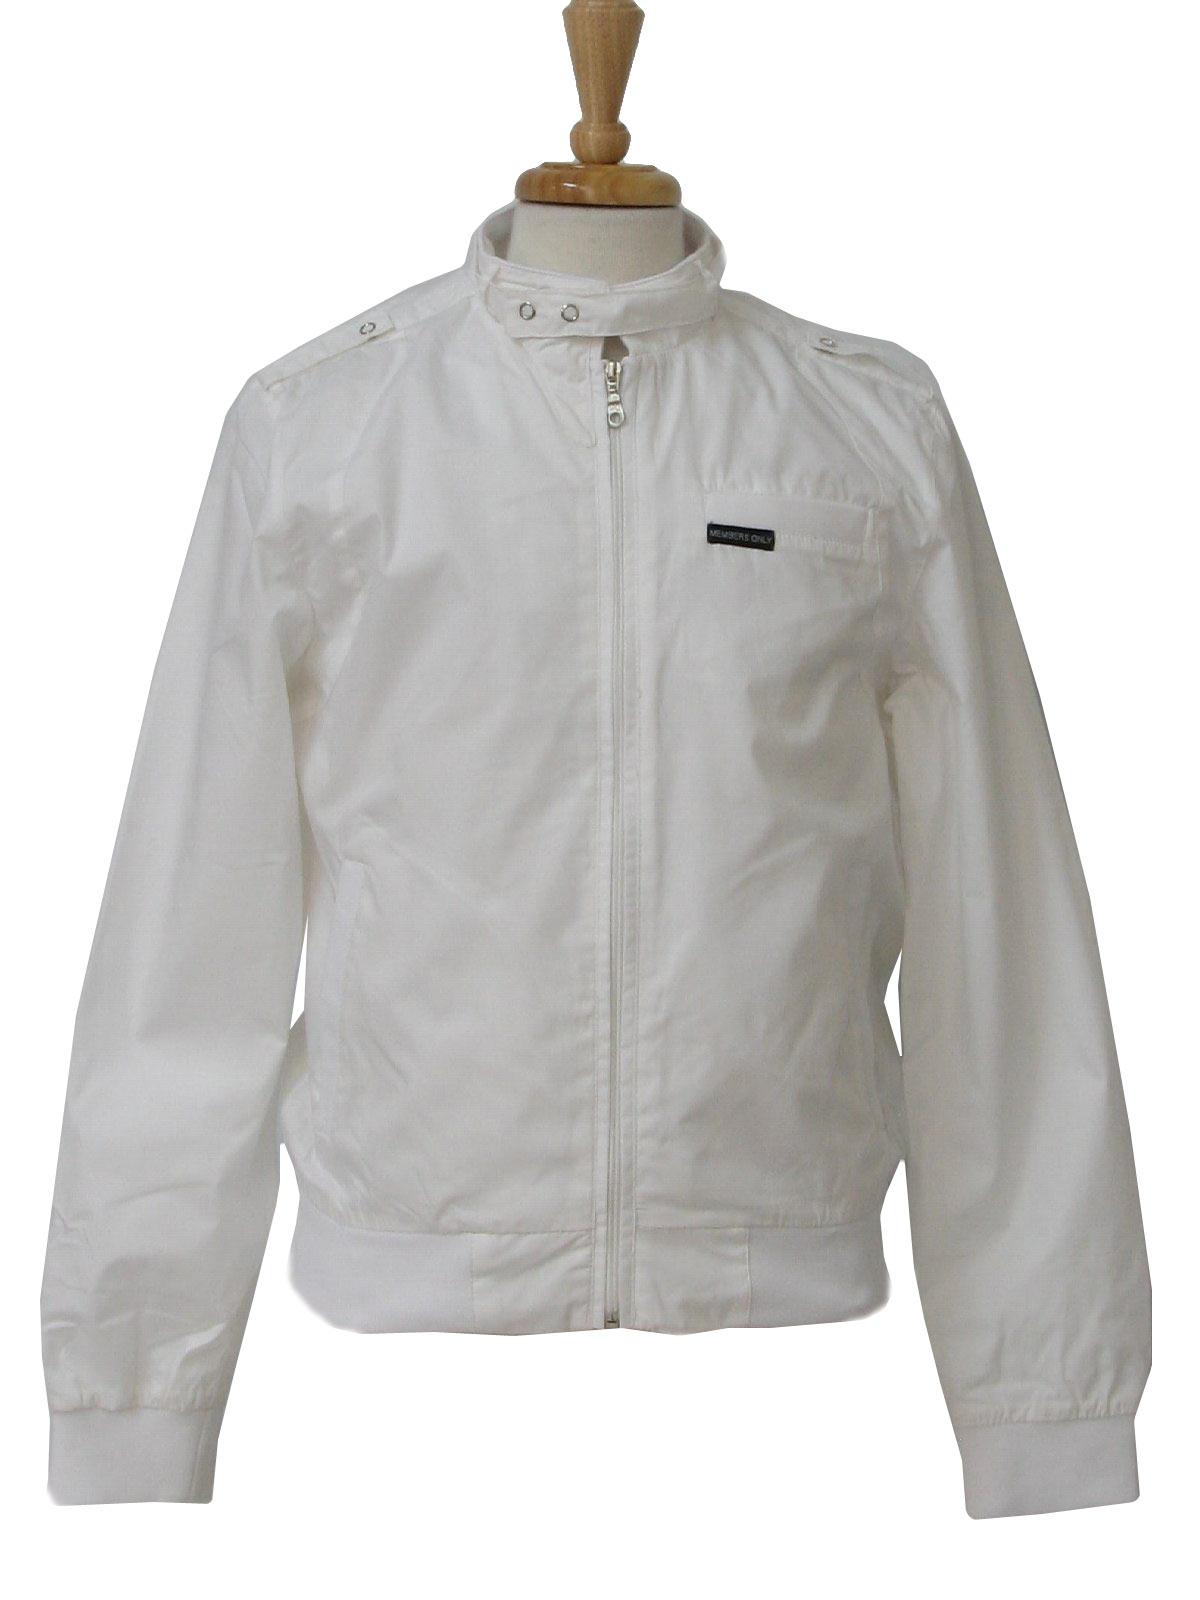 Vintage 1980's Jacket: 80s style -Members Only- Mens white polyester ...